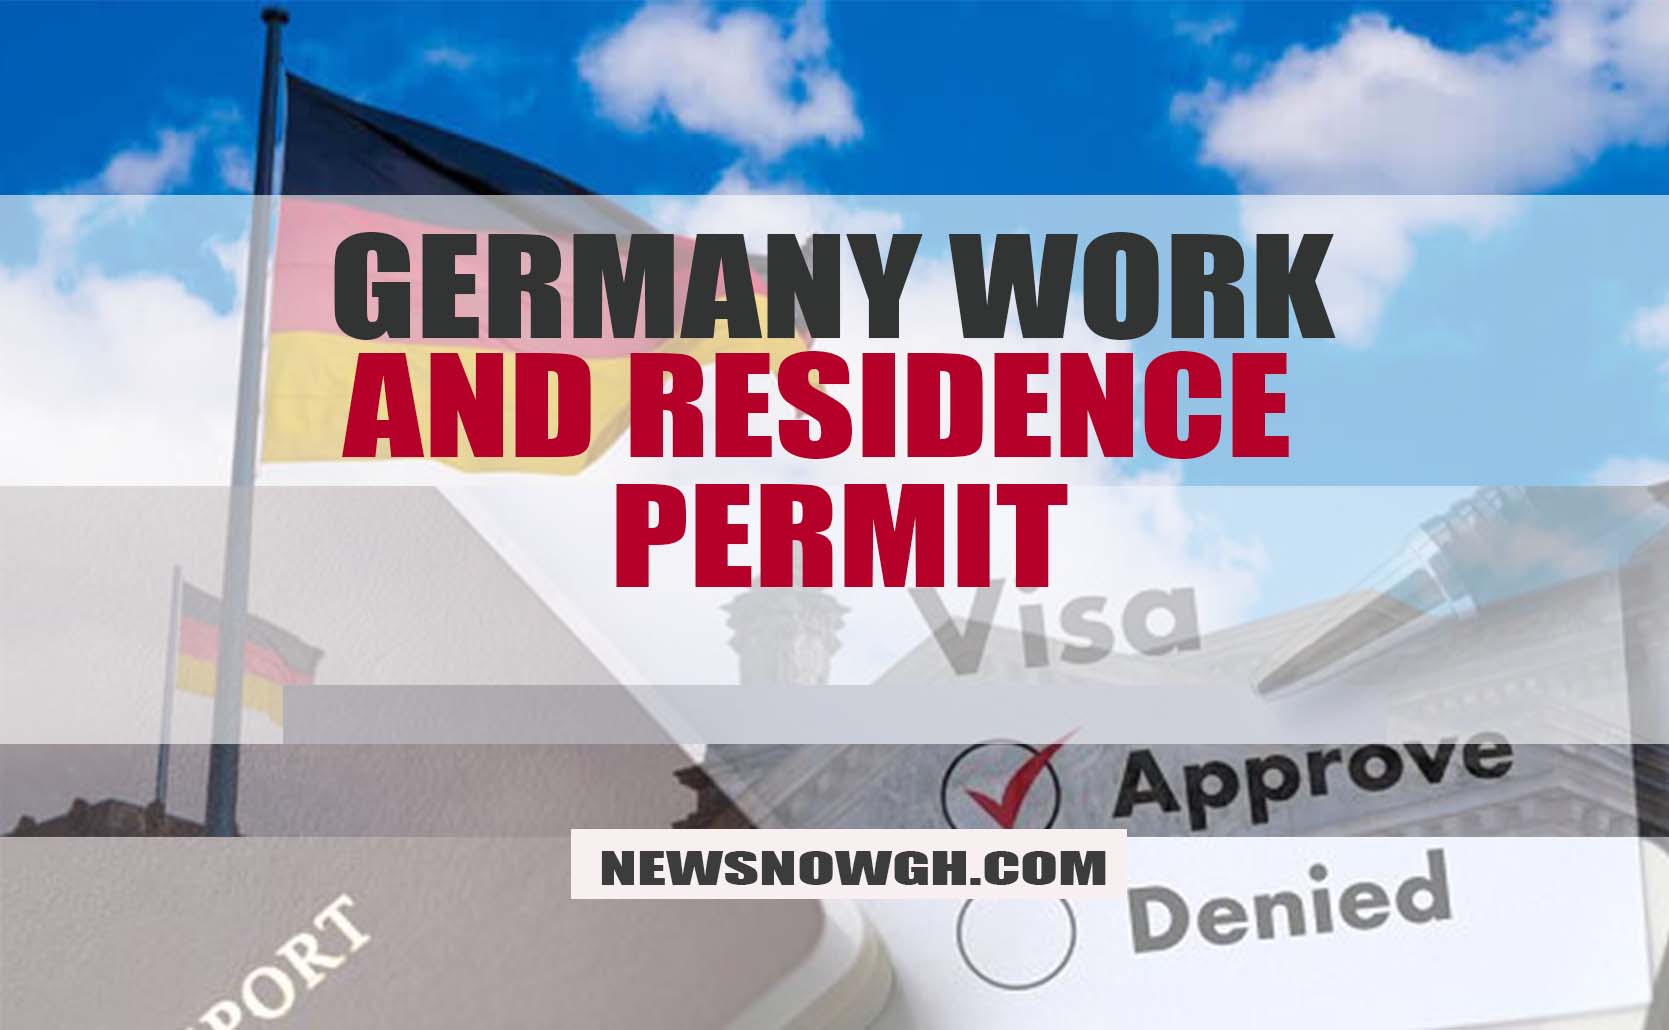 GERMANY WORK AND RESIDENCE PERMIT